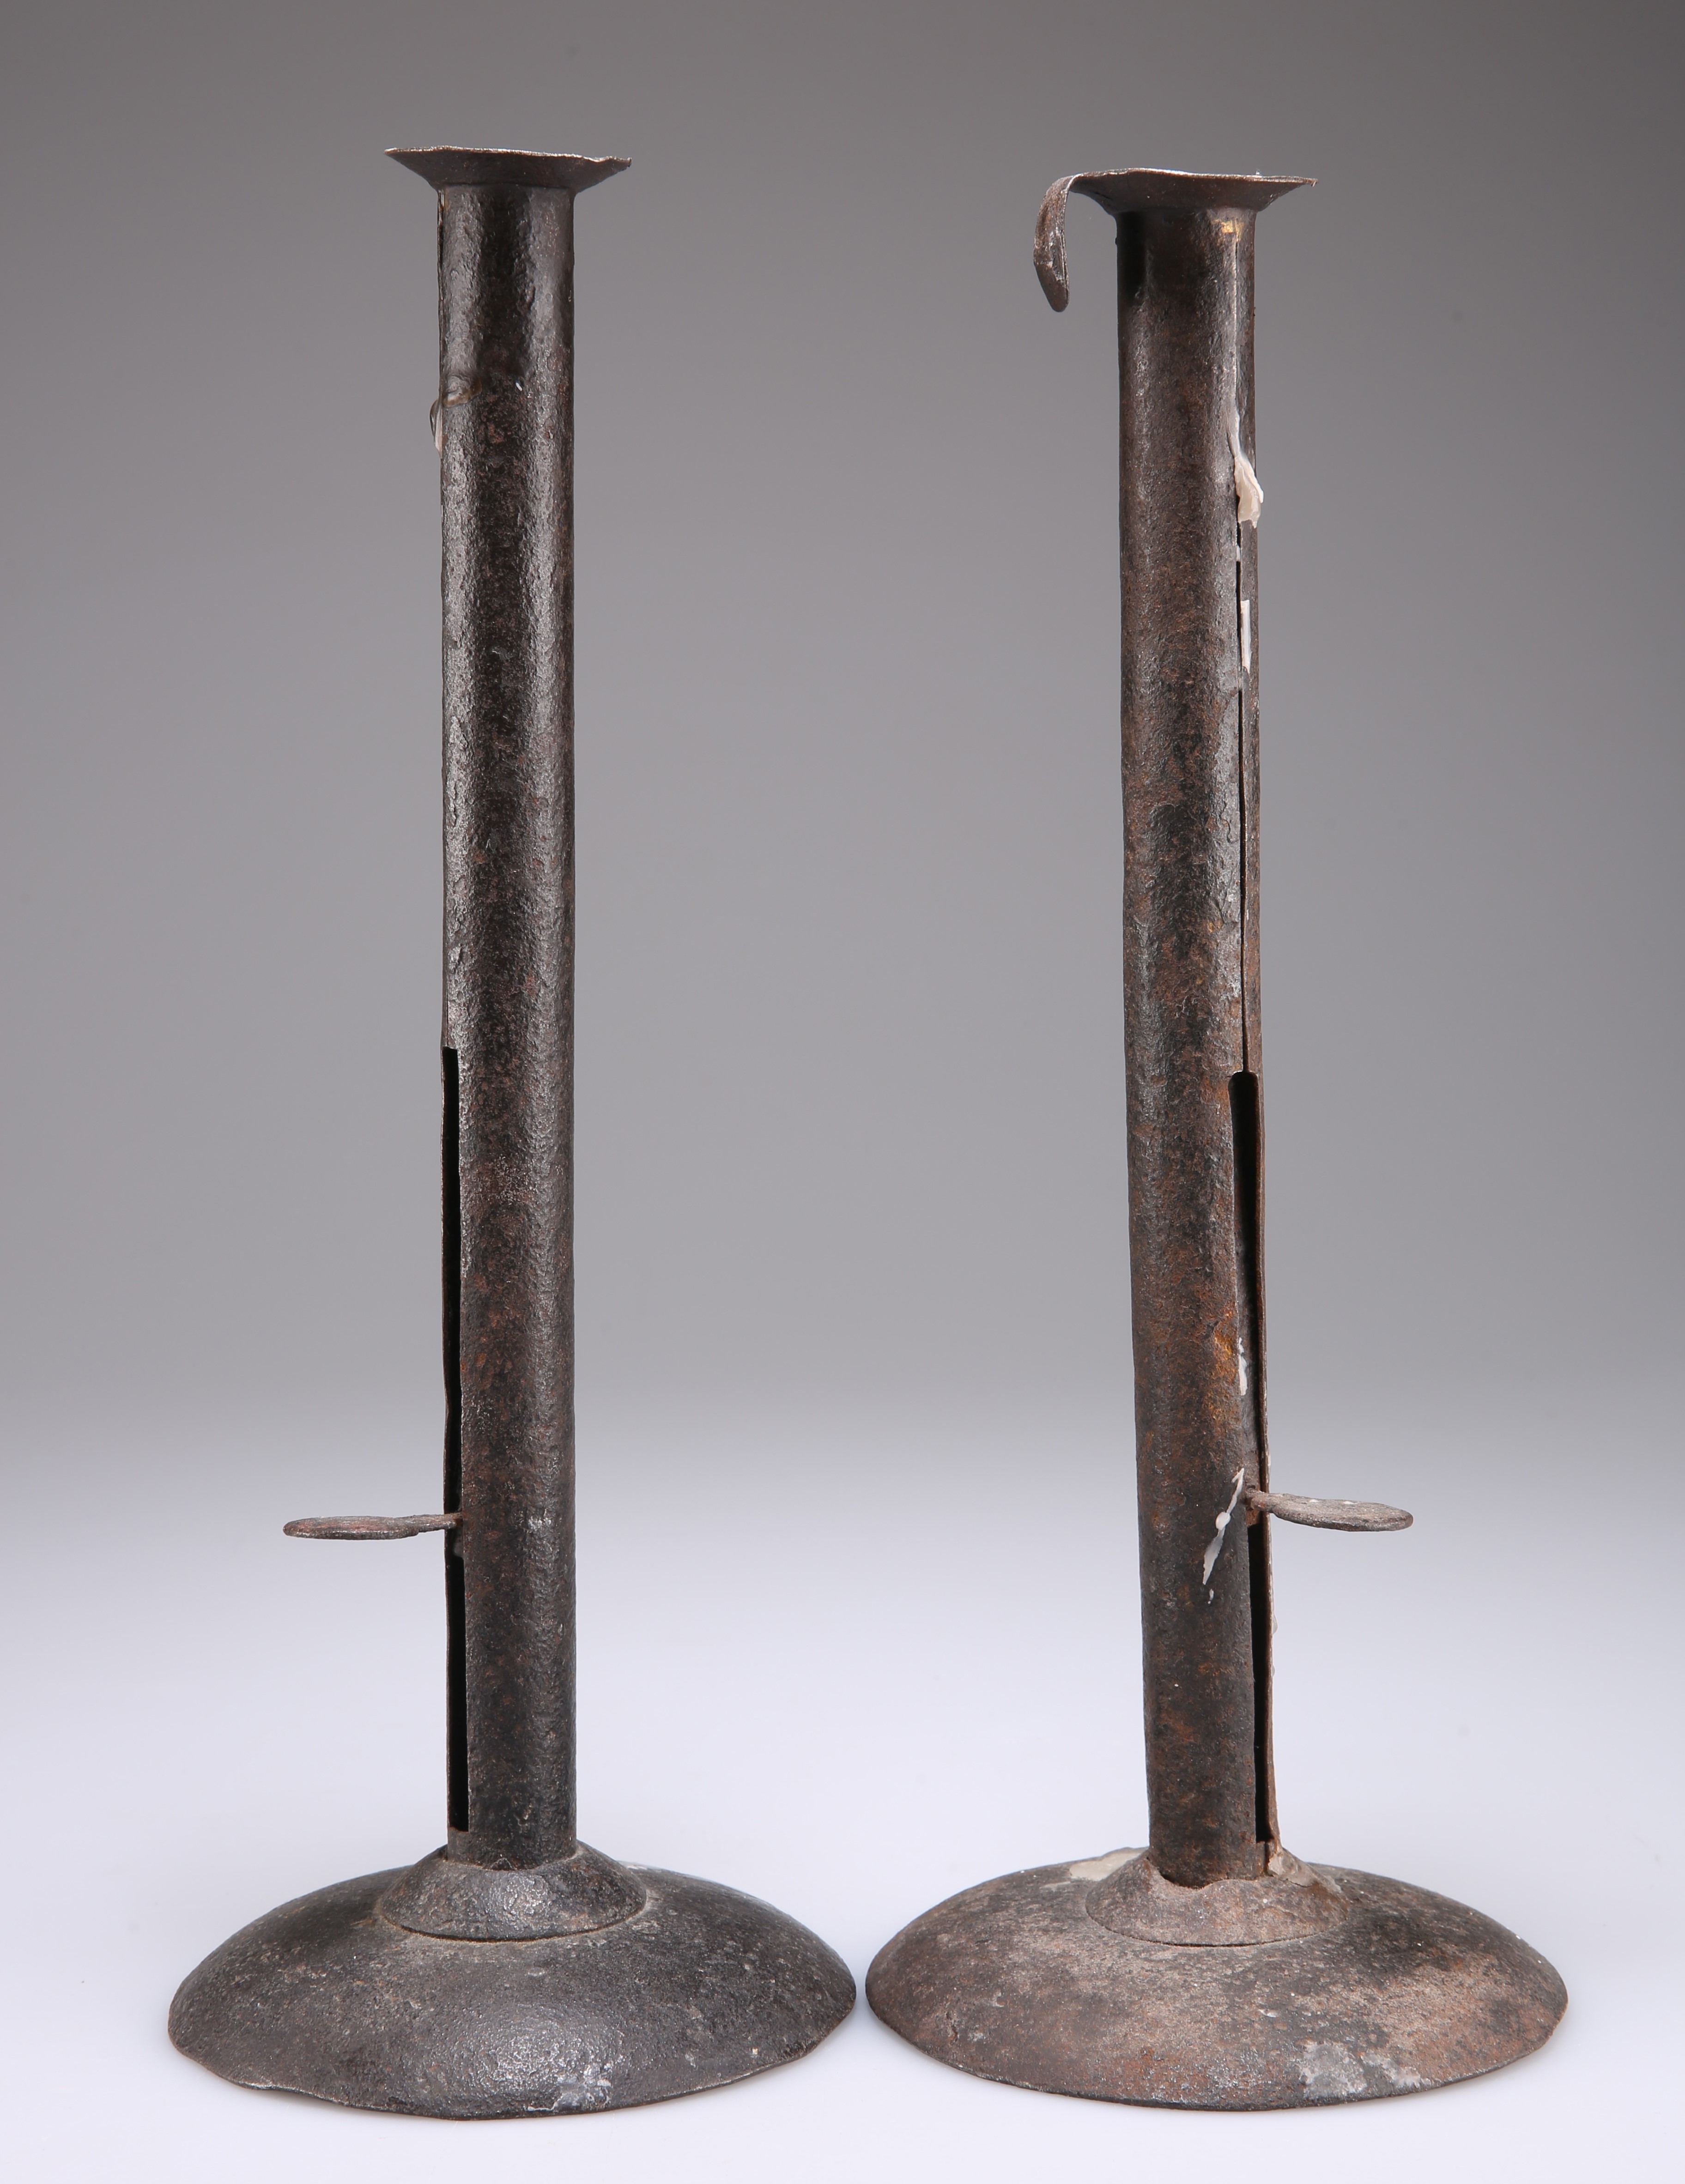 A PAIR OF EARLY 19TH CENTURY SHEET IRON CANDLESTICKS